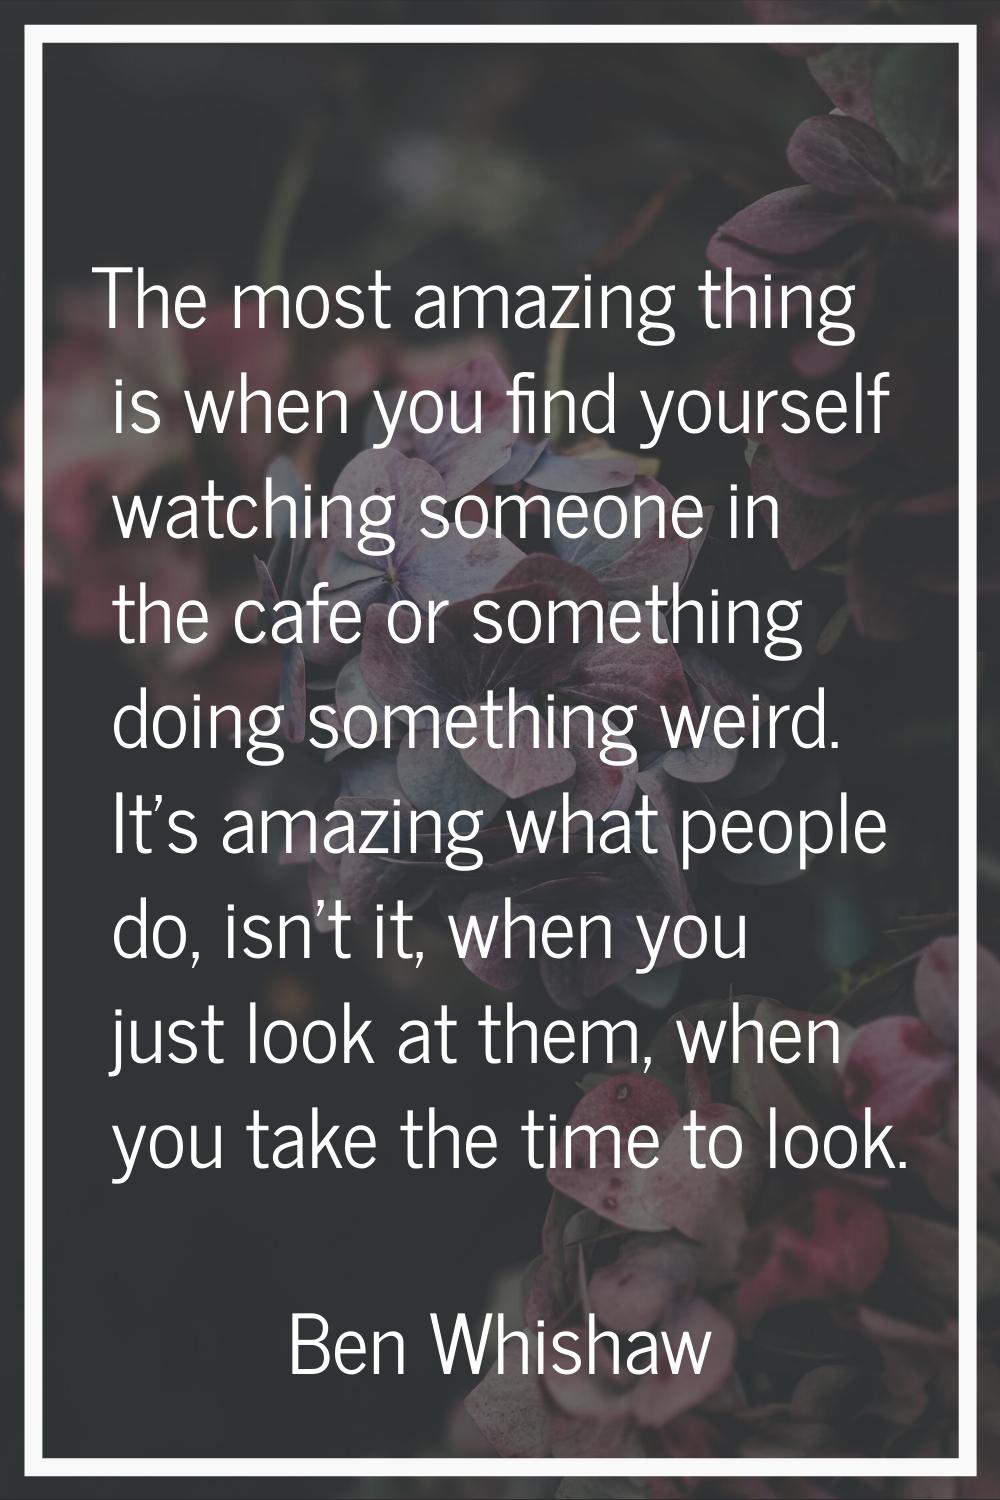 The most amazing thing is when you find yourself watching someone in the cafe or something doing so